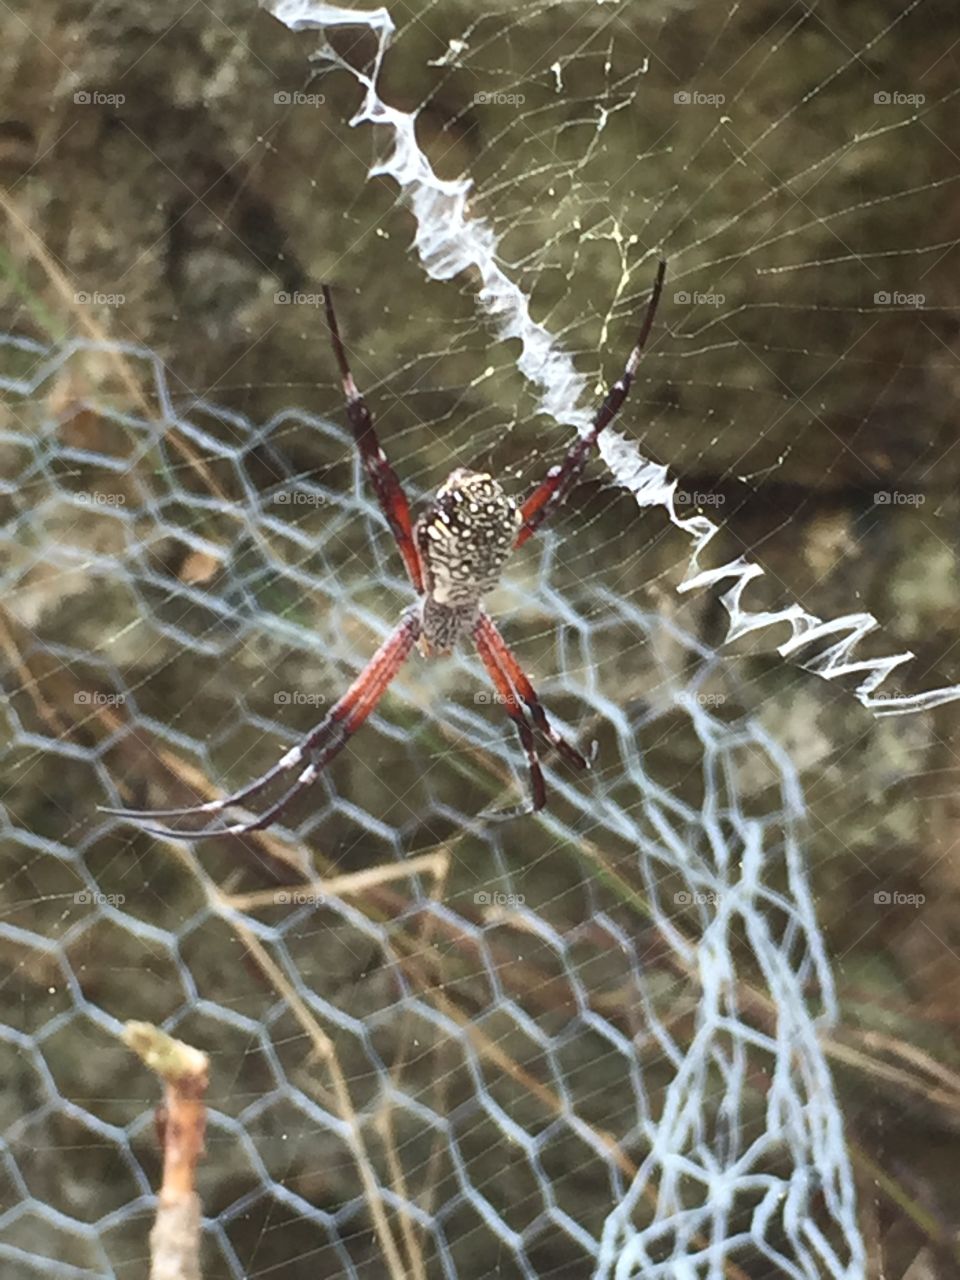 Spider on its net in the jungles of Saipan